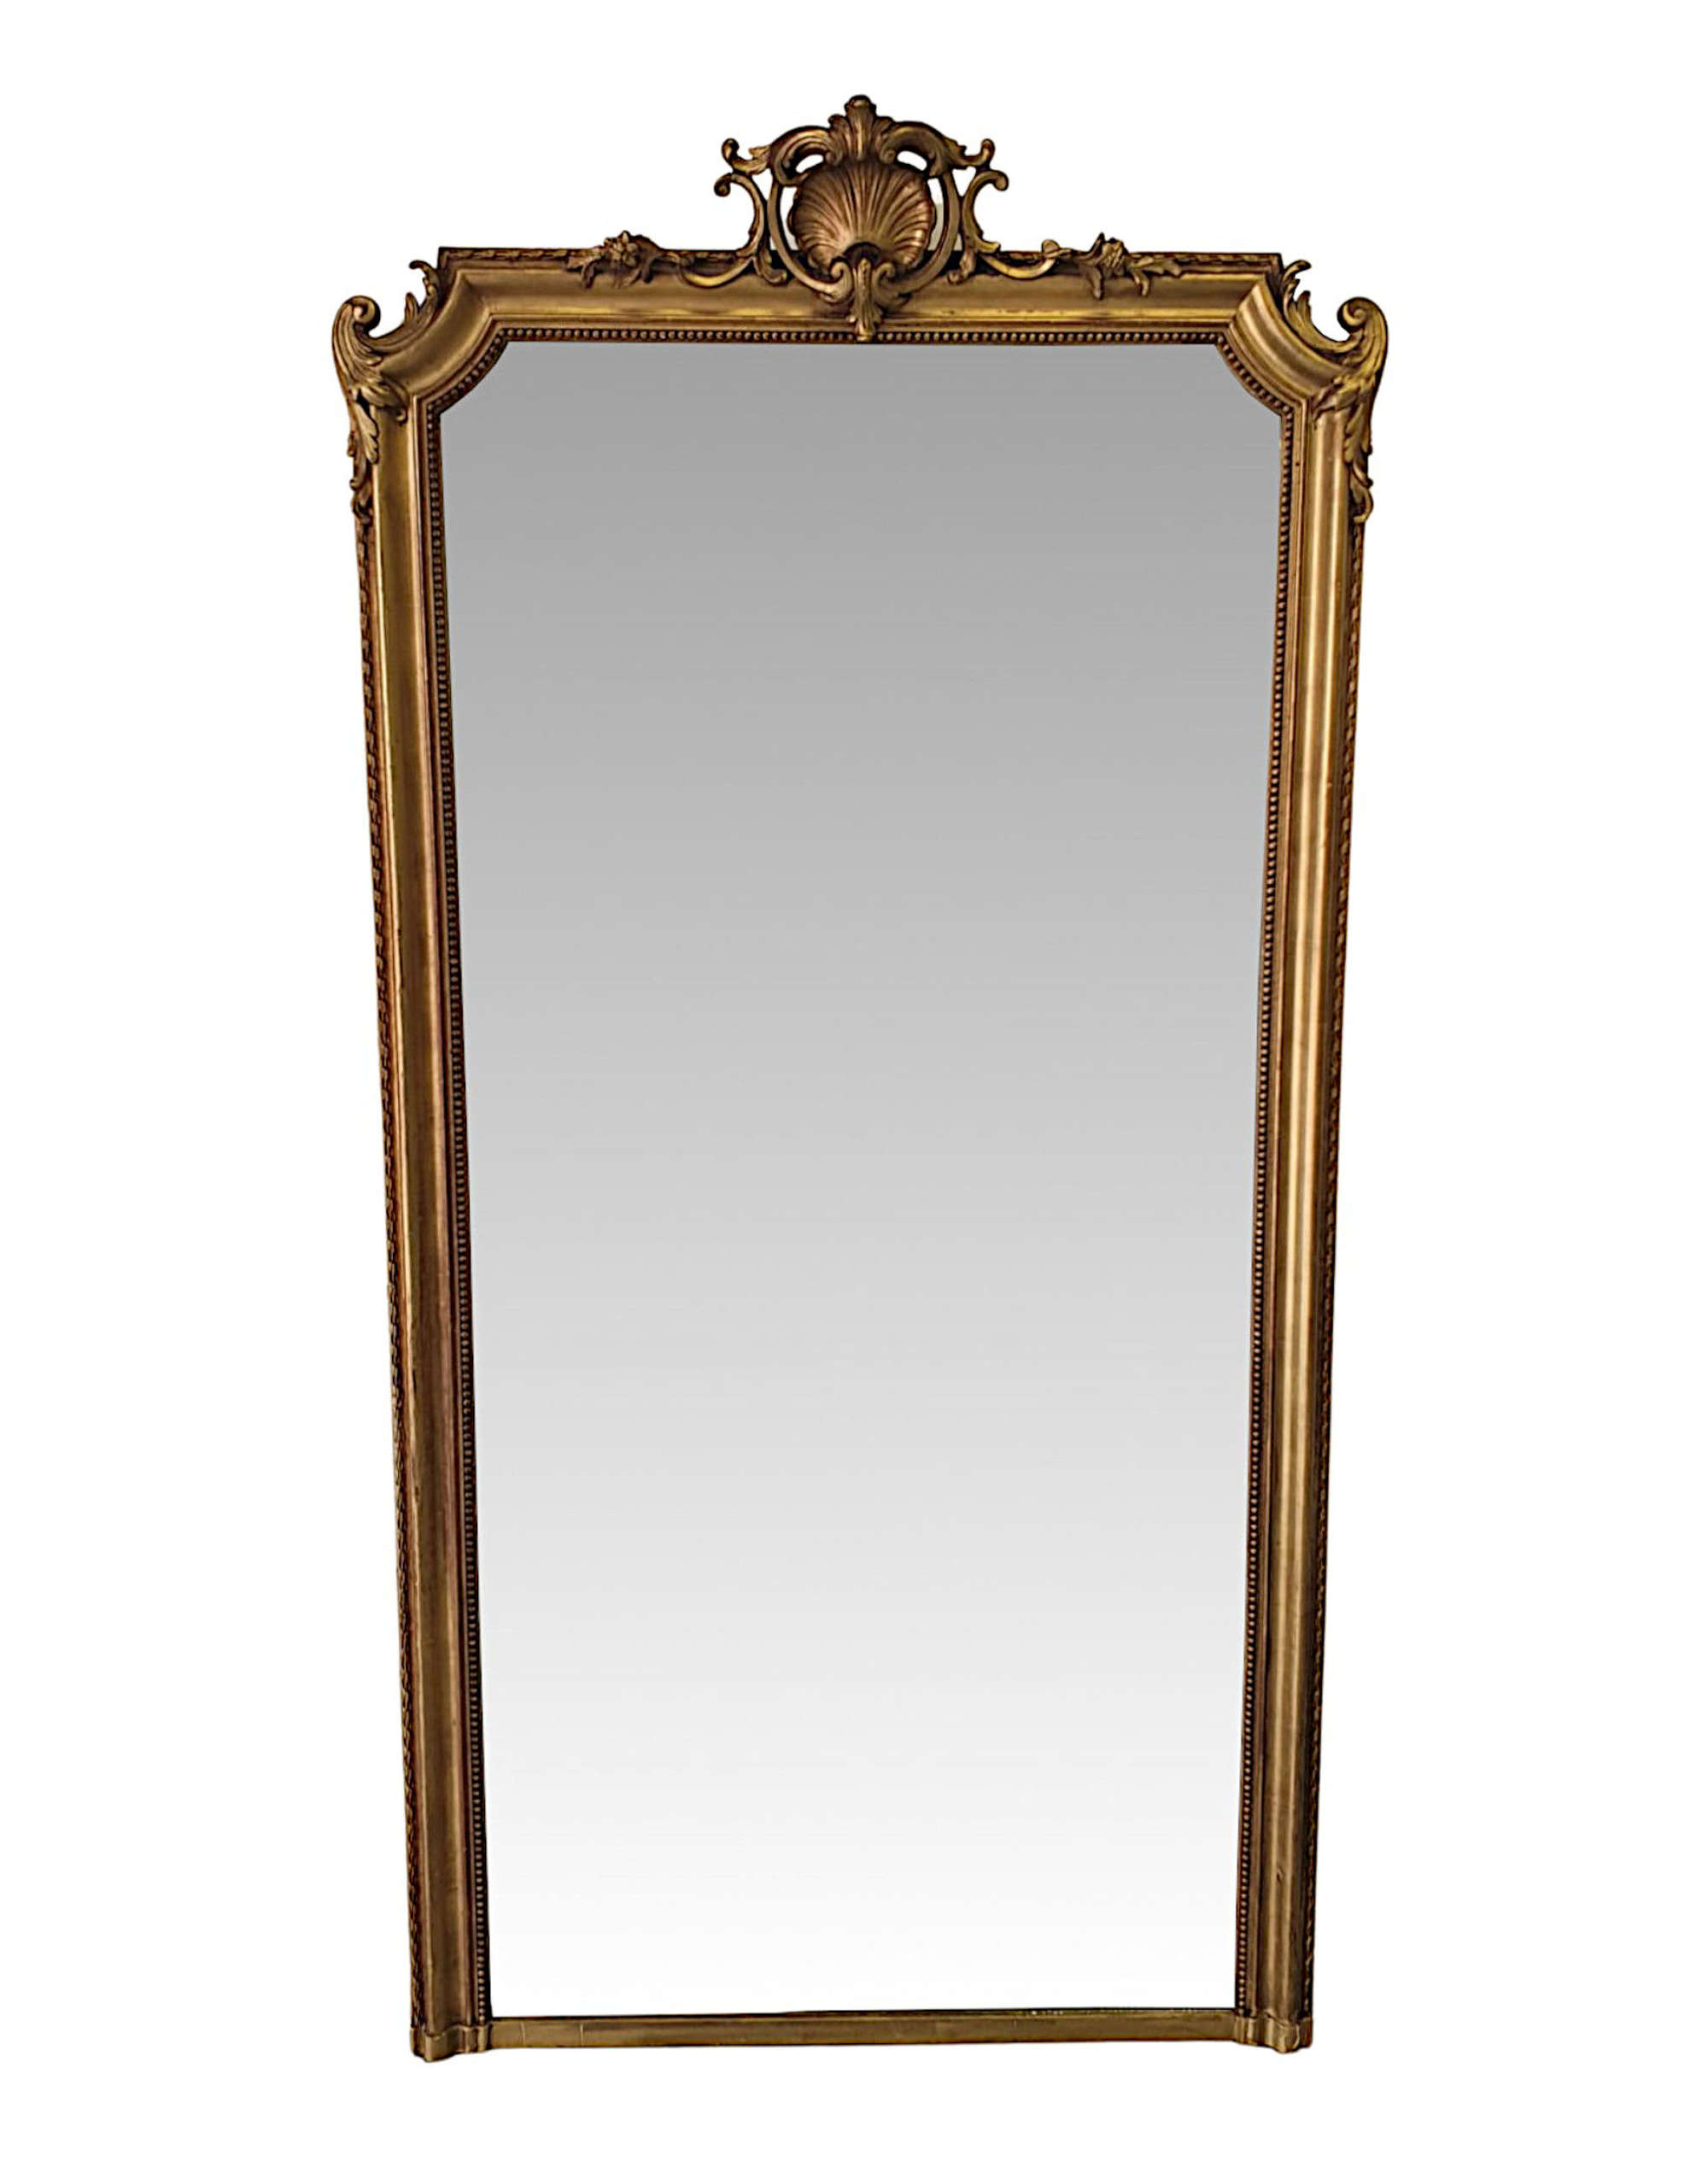 A Superb Tall 19th Century Giltwood Dressing or Leaner Mirror